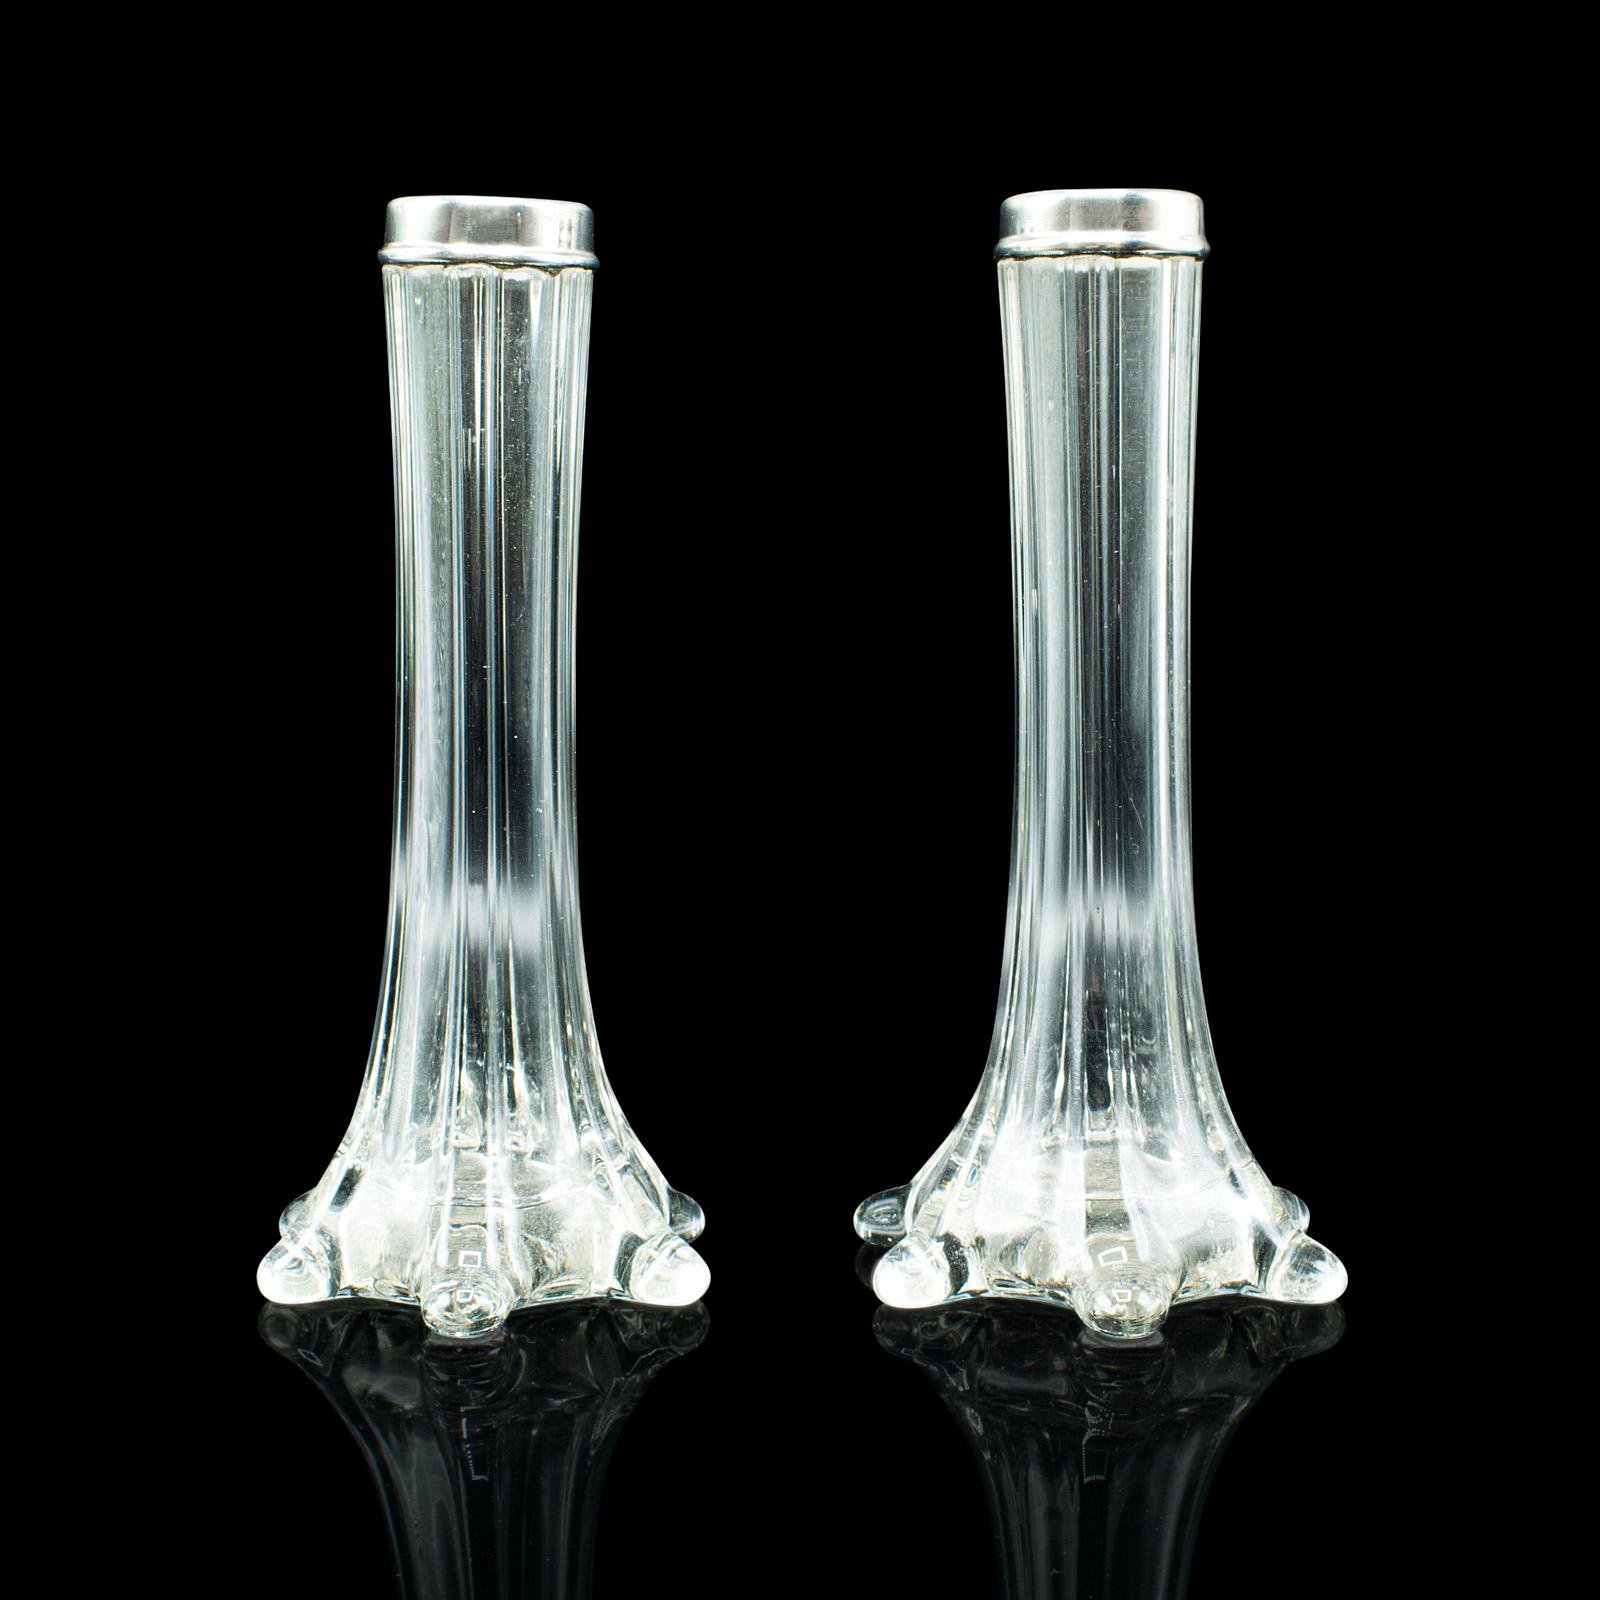 This is a pair of antique breakfast stem vases. An English, glass and silver collared posy vase, hallmarked to the late Victorian period, dated 1901.

Delightfully petite vases with appealing forms
Displaying a desirable aged patina